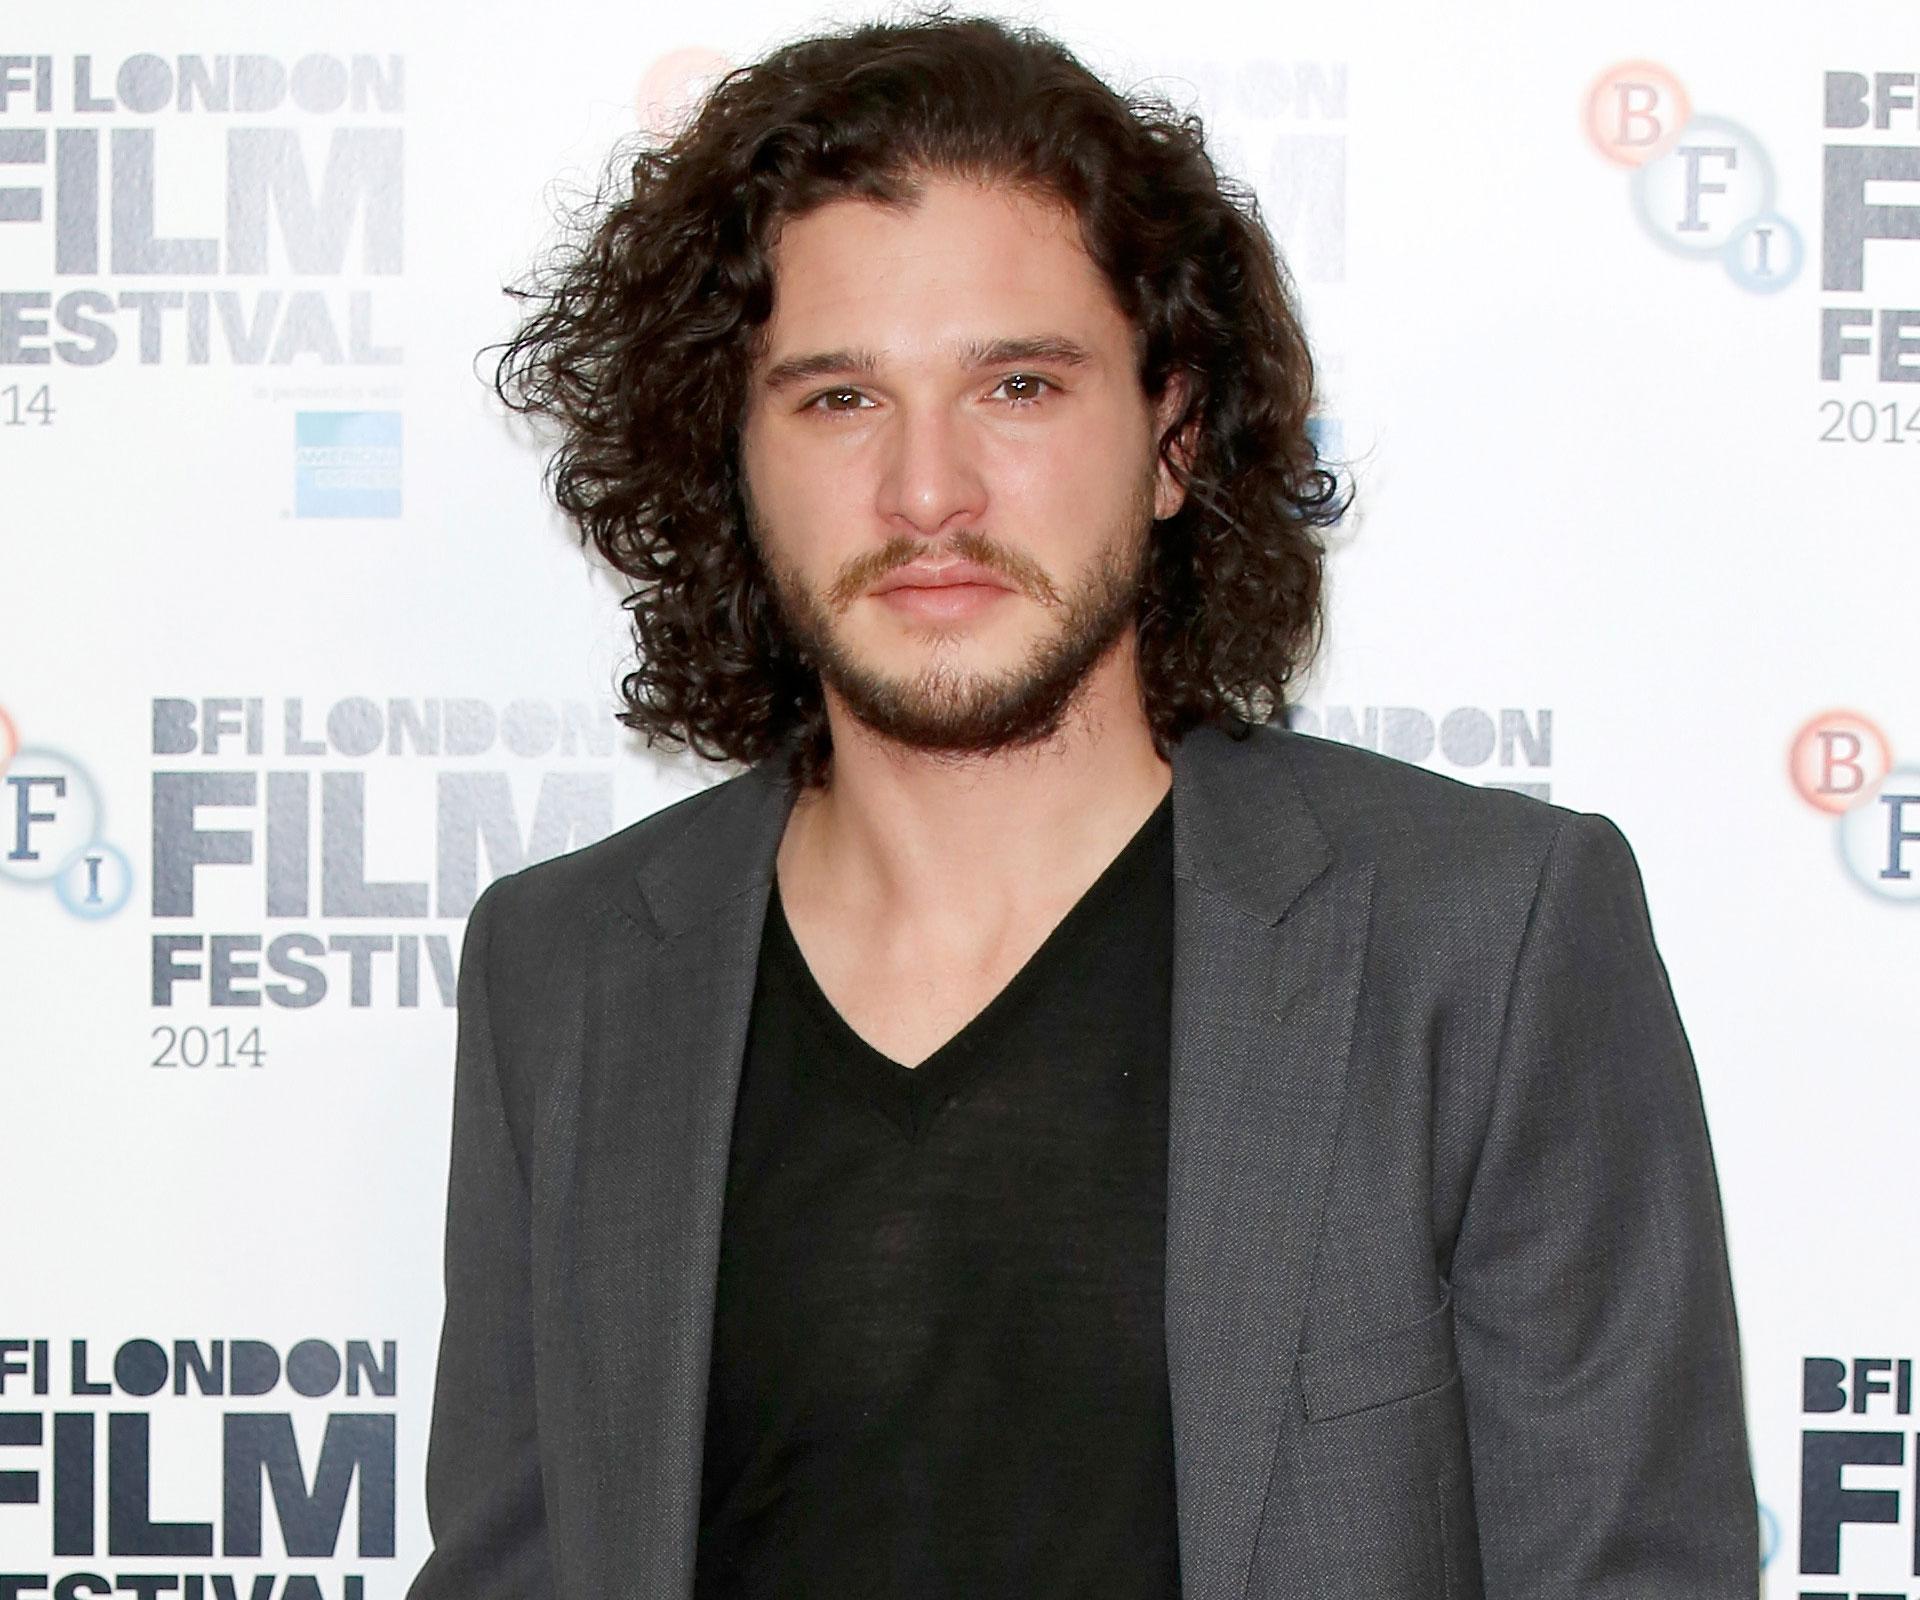 Kit Harington says being called a hunk is "offensive"